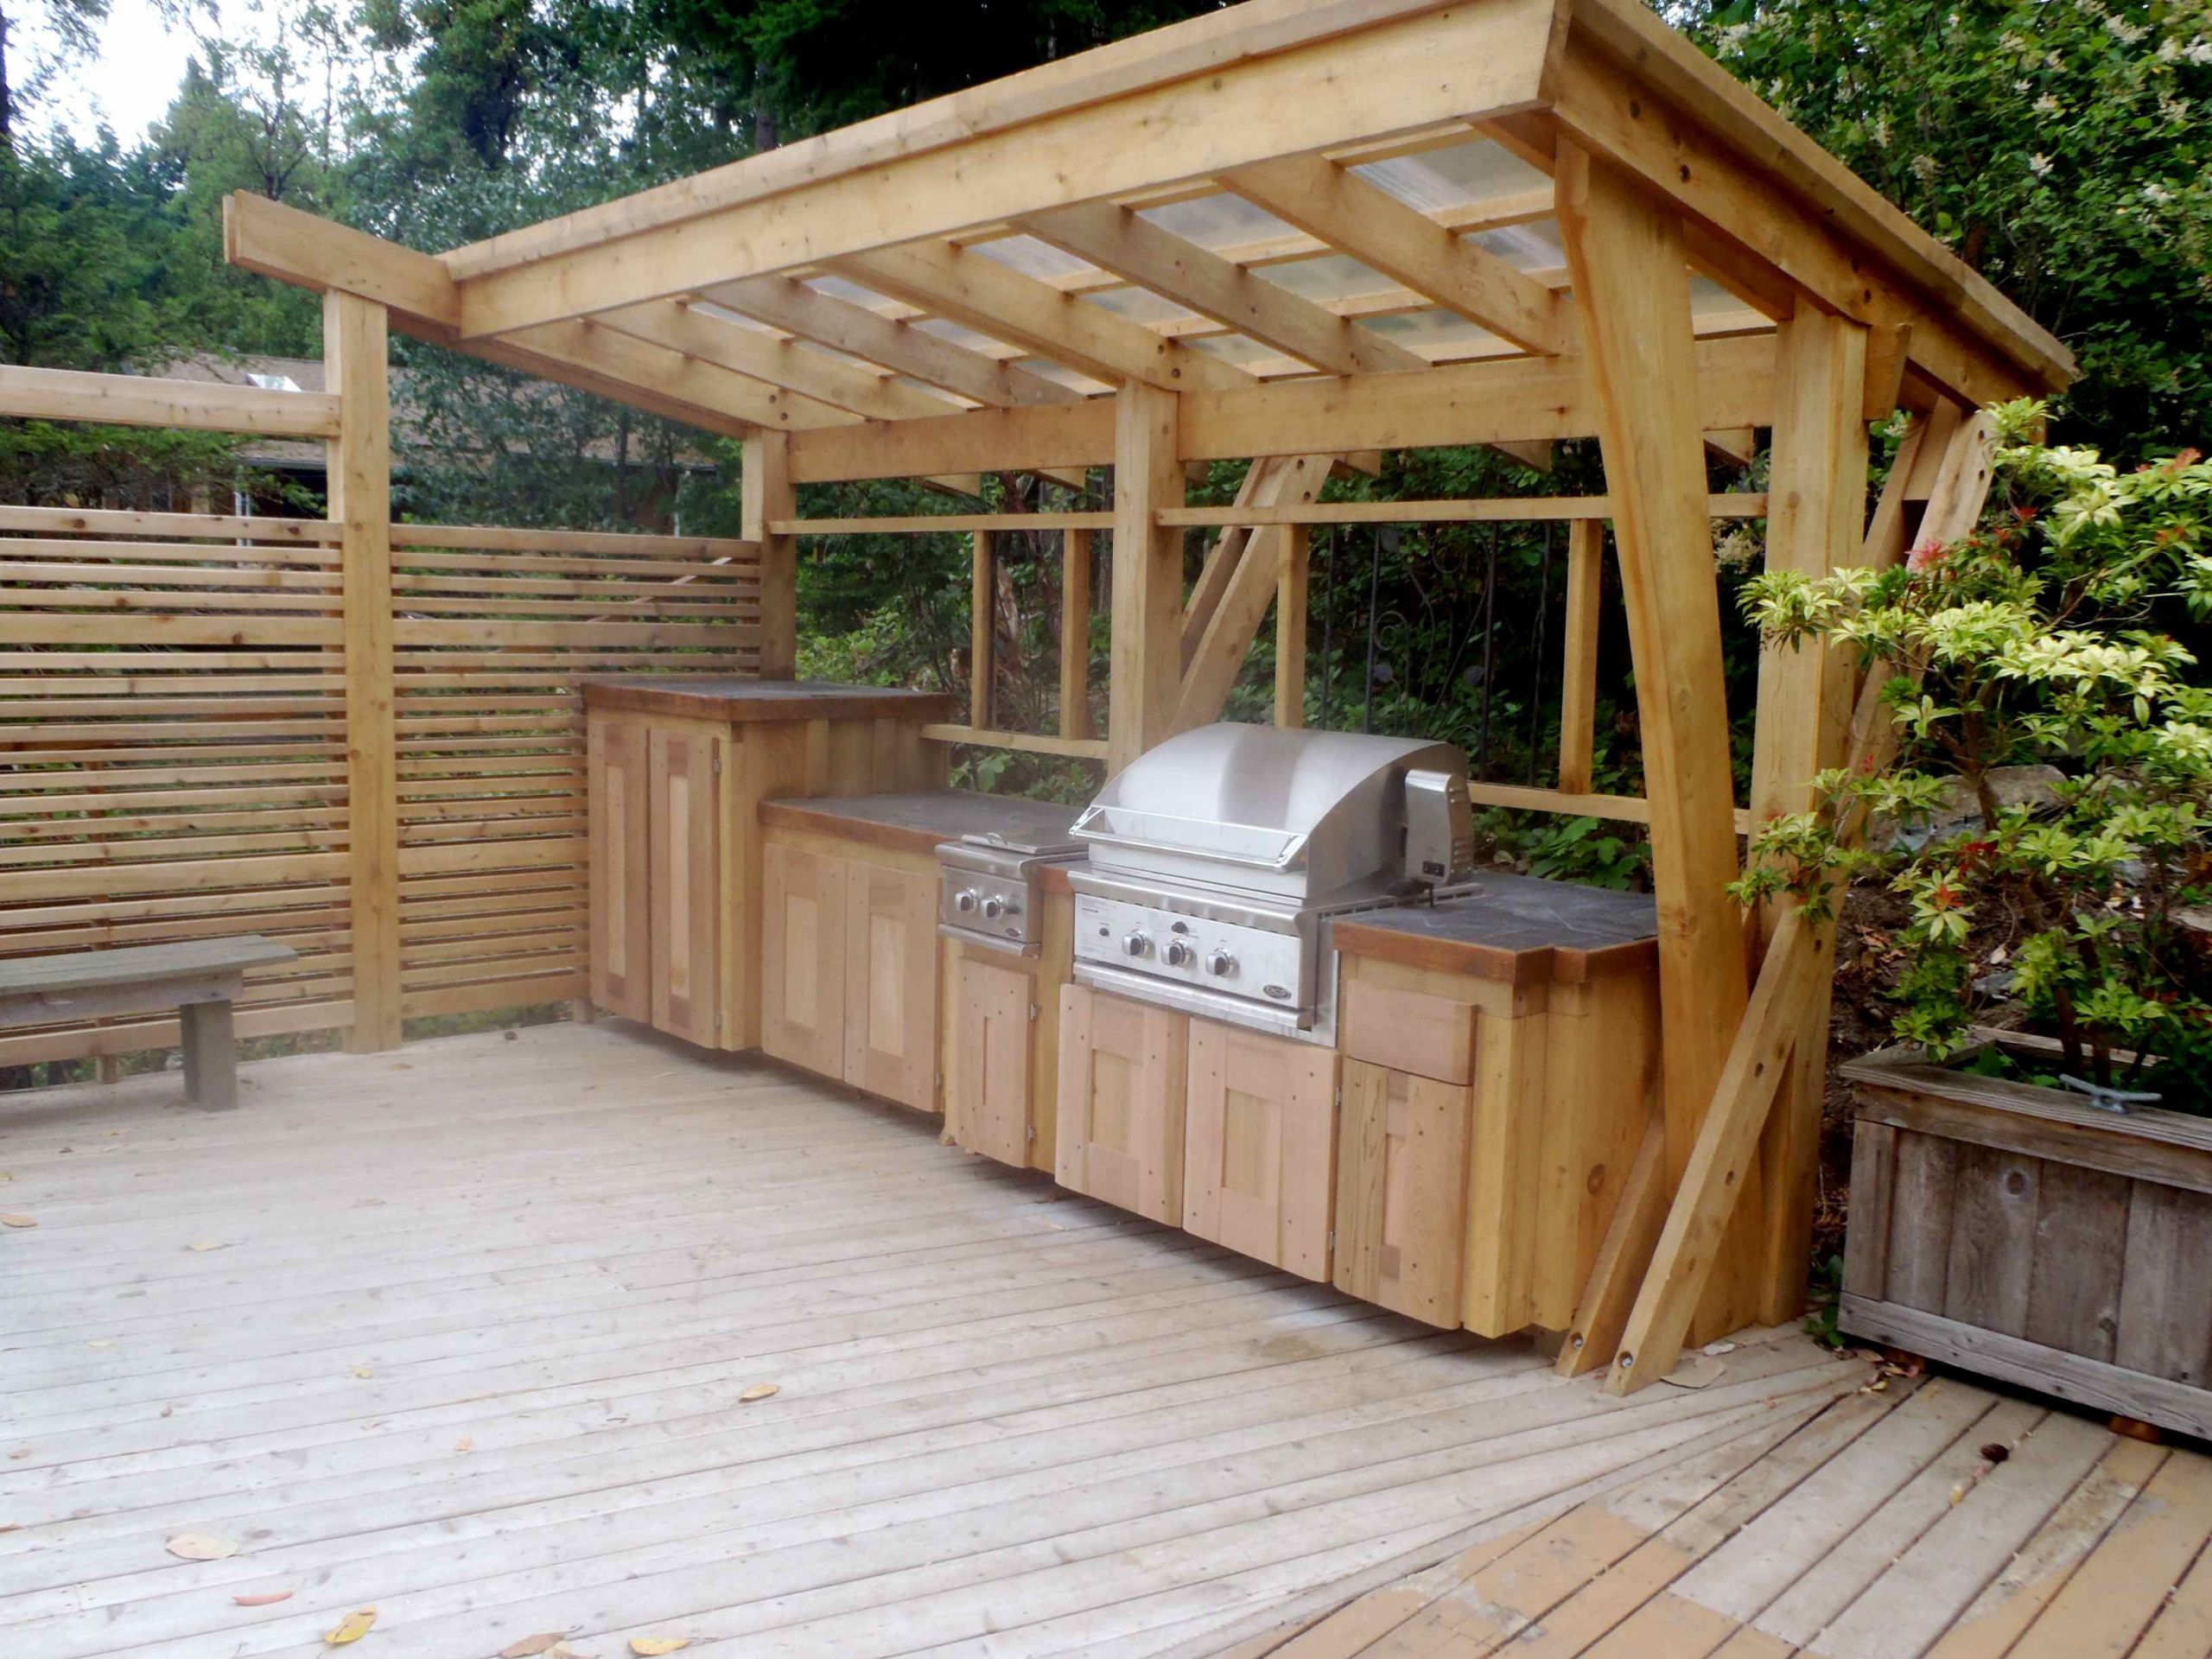 Outdoor Kitchen On Wood Deck
 Pin by Rosalind Trenado on For the Home